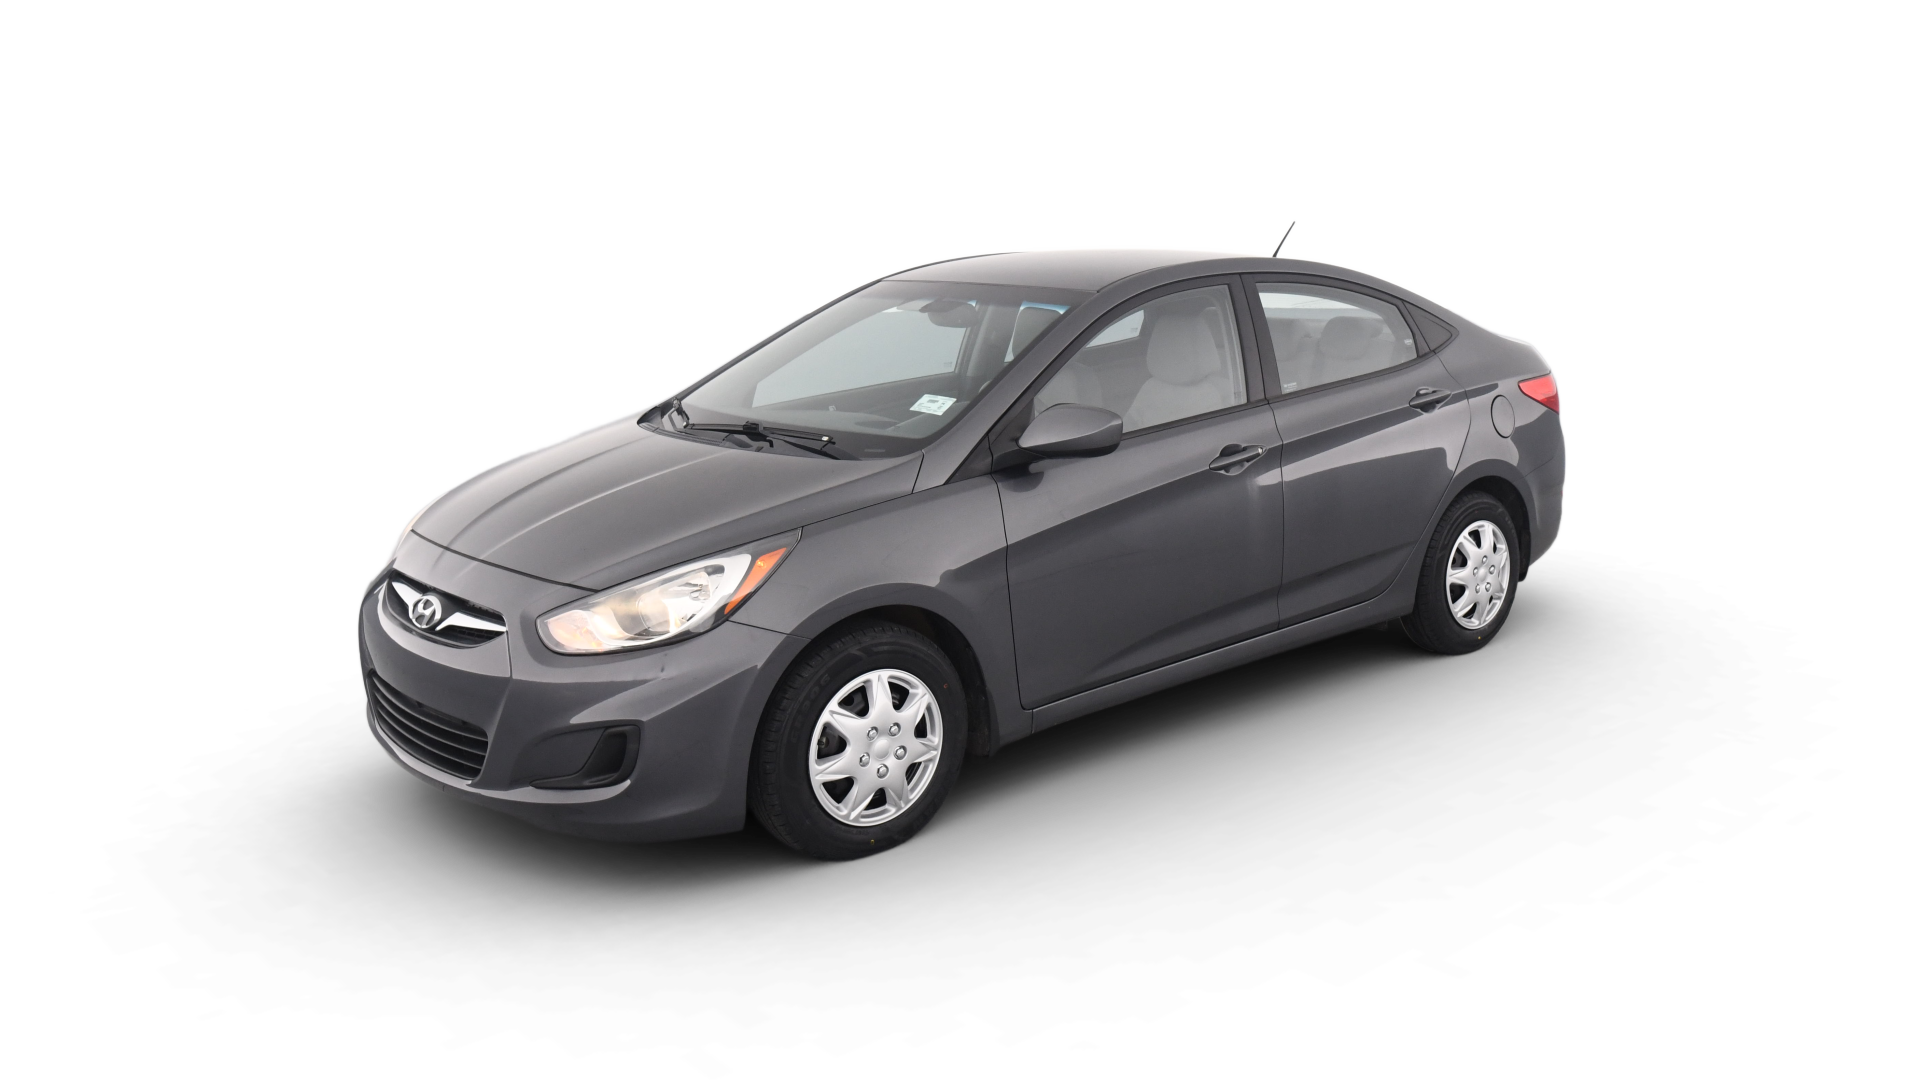 Used Hyundai Accent For Sale Online | Carvana